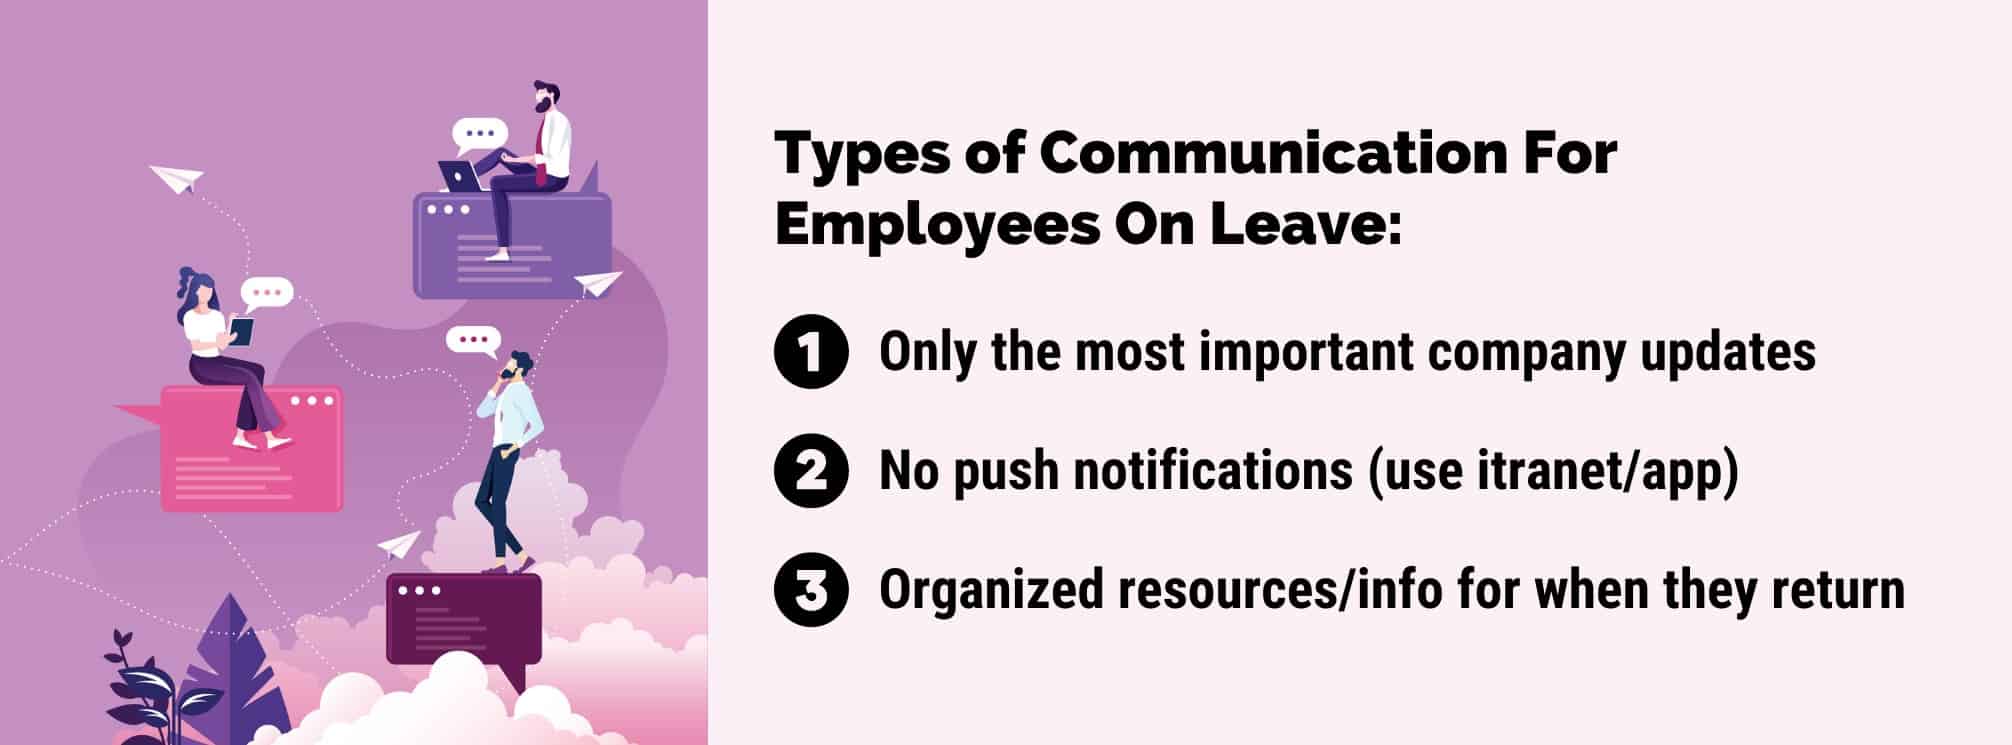 how to communicate with employees while on leave: 
1. only the most important company updates
2. no push notifications
3. organized resources/info for when they return